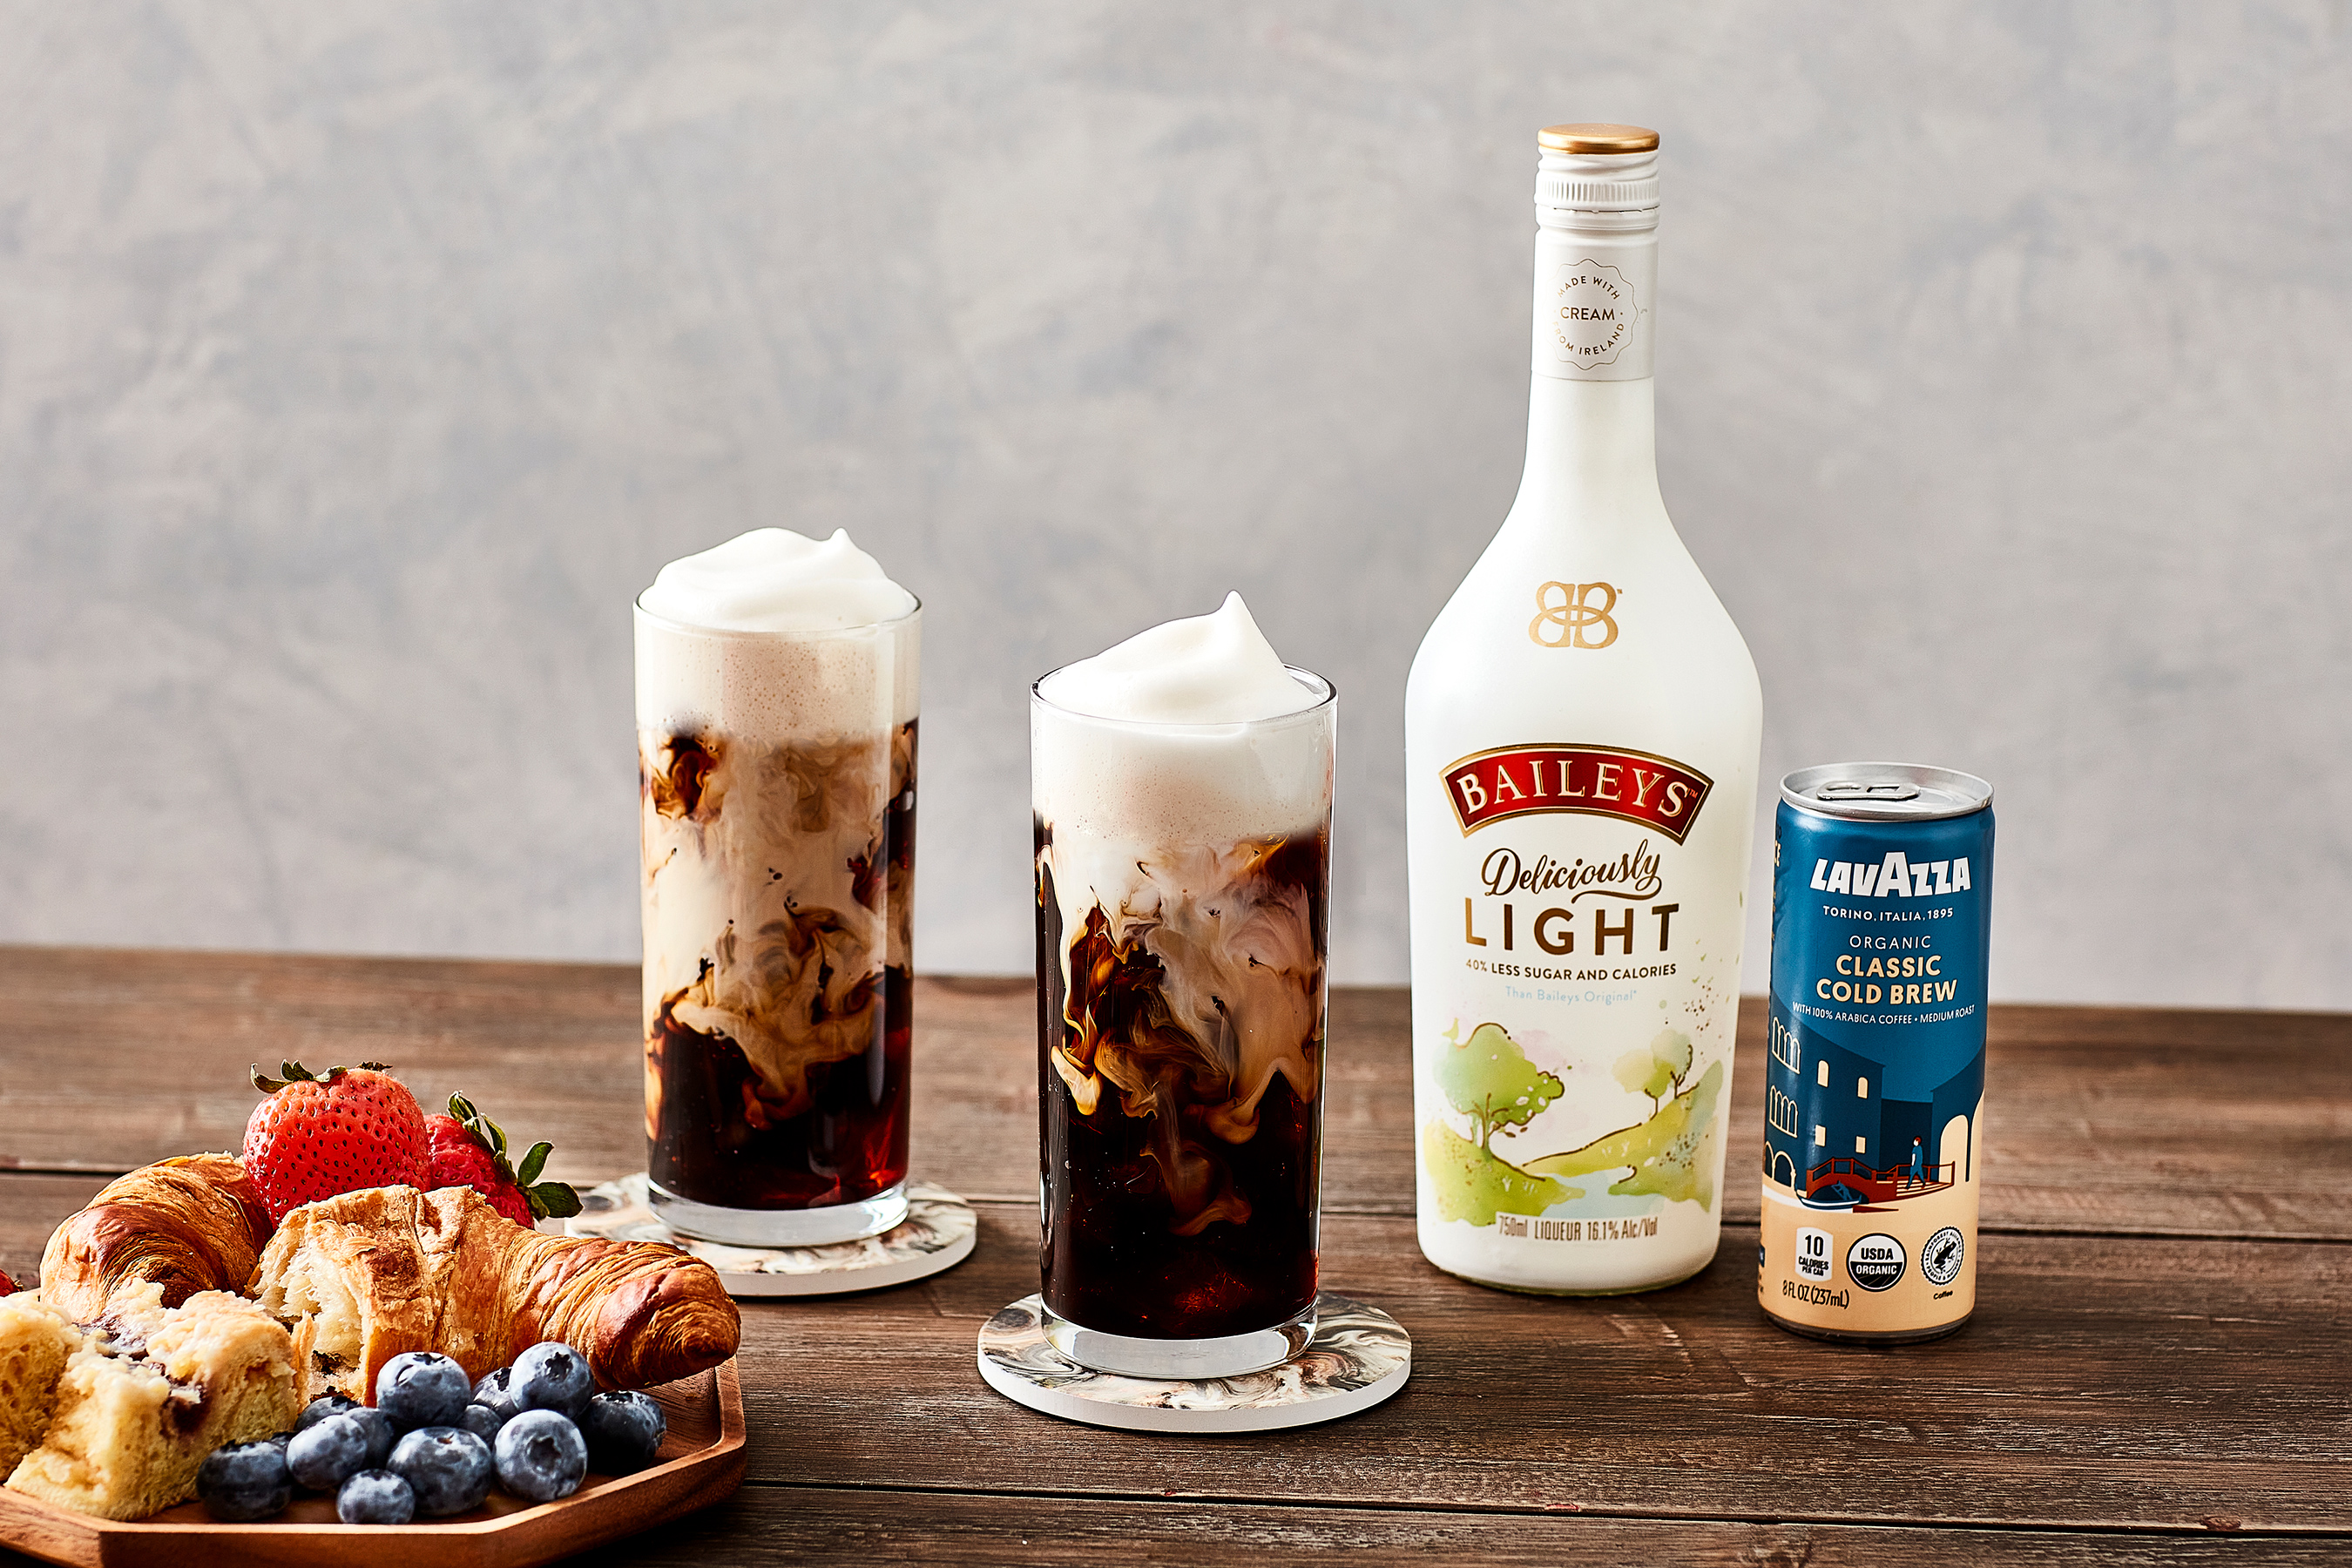 Lavazza Cold Brew with Baileys Deliciously Light Cold Foam